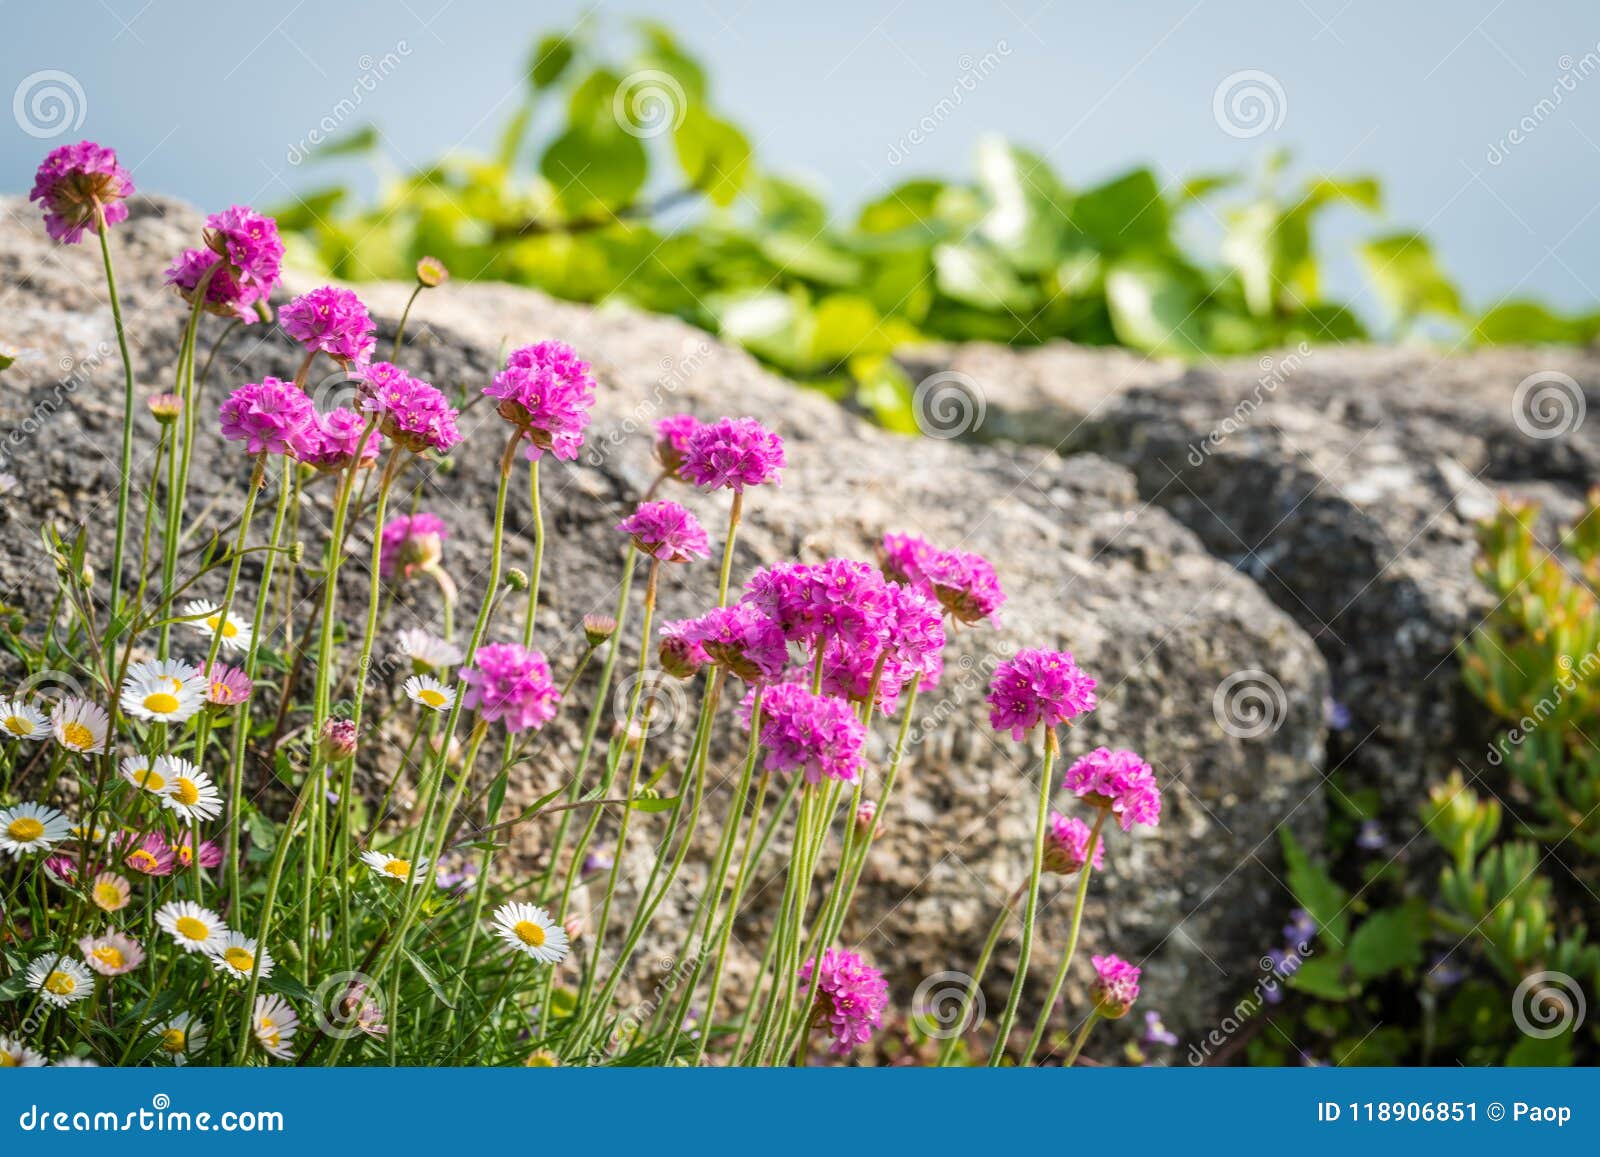 cornwall flowers called pink sea thrift